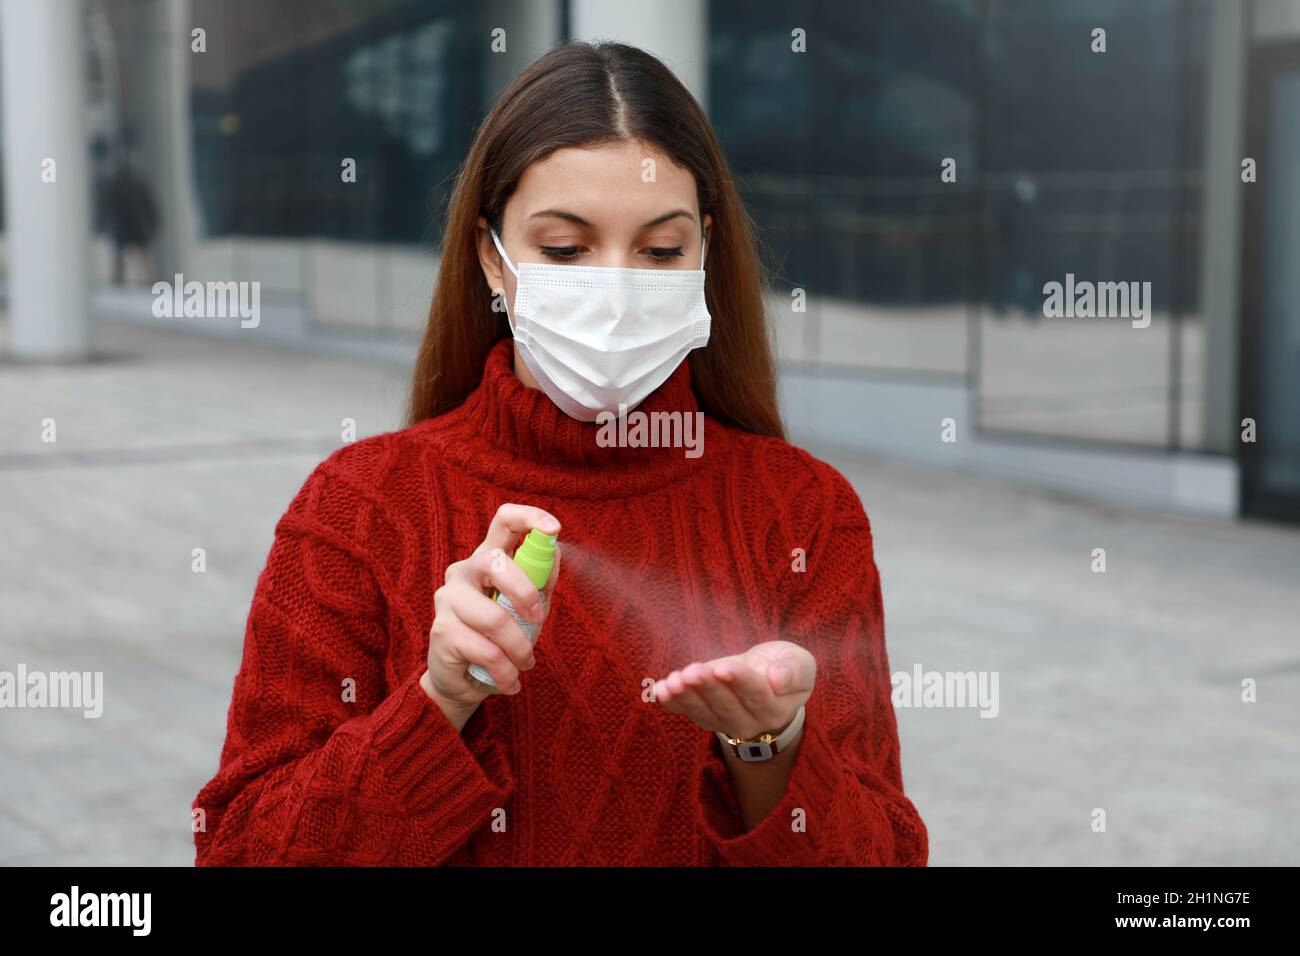 Portrait of young woman wearing protective medical mask spraying alcohol sanitizer on her hands in modern city street Stock Photo